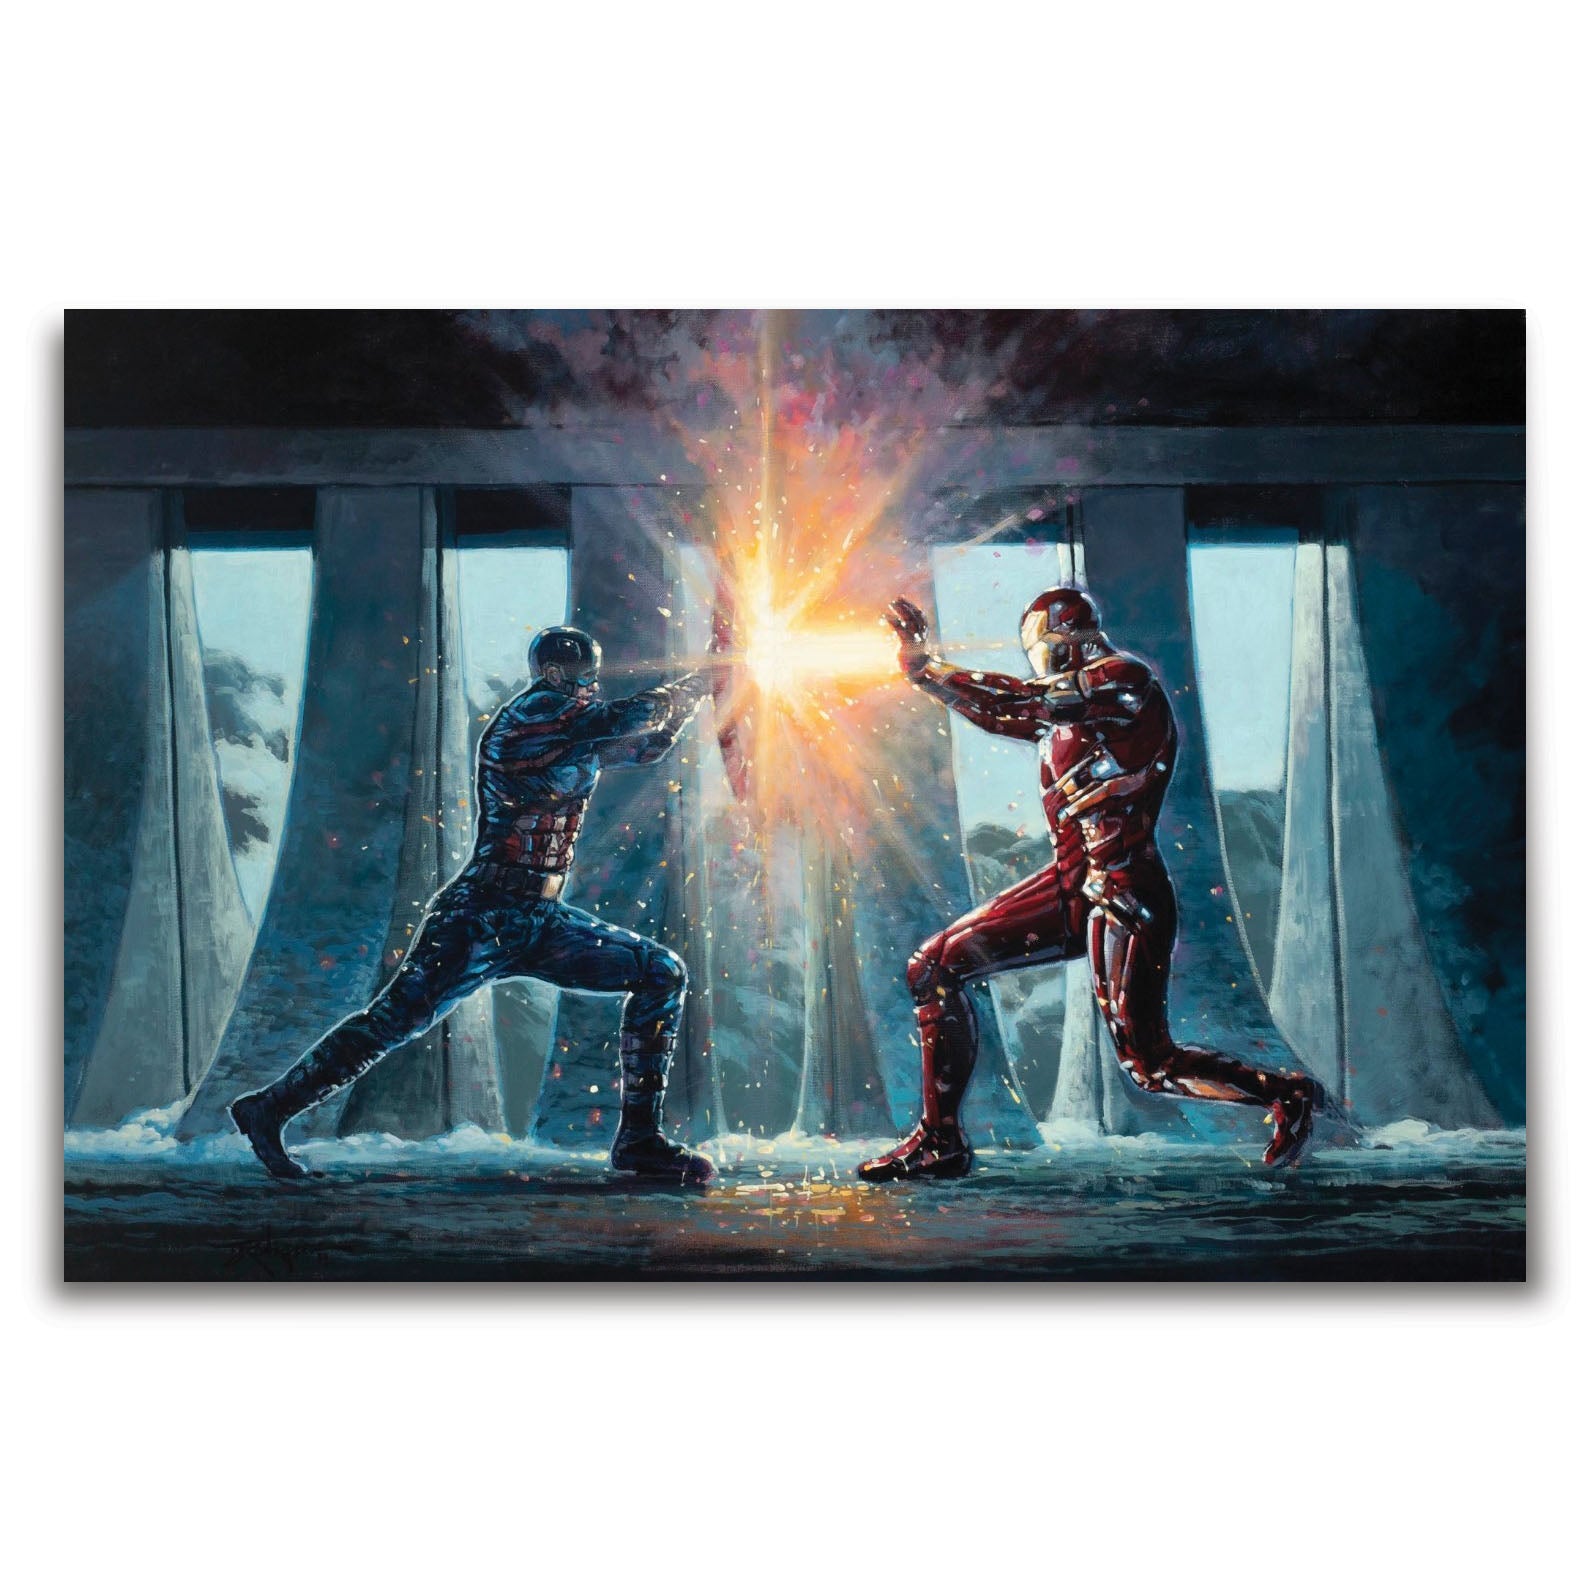 Rodel Gonzalez Marvel "Did You Know" Limited Edition Canvas Giclee